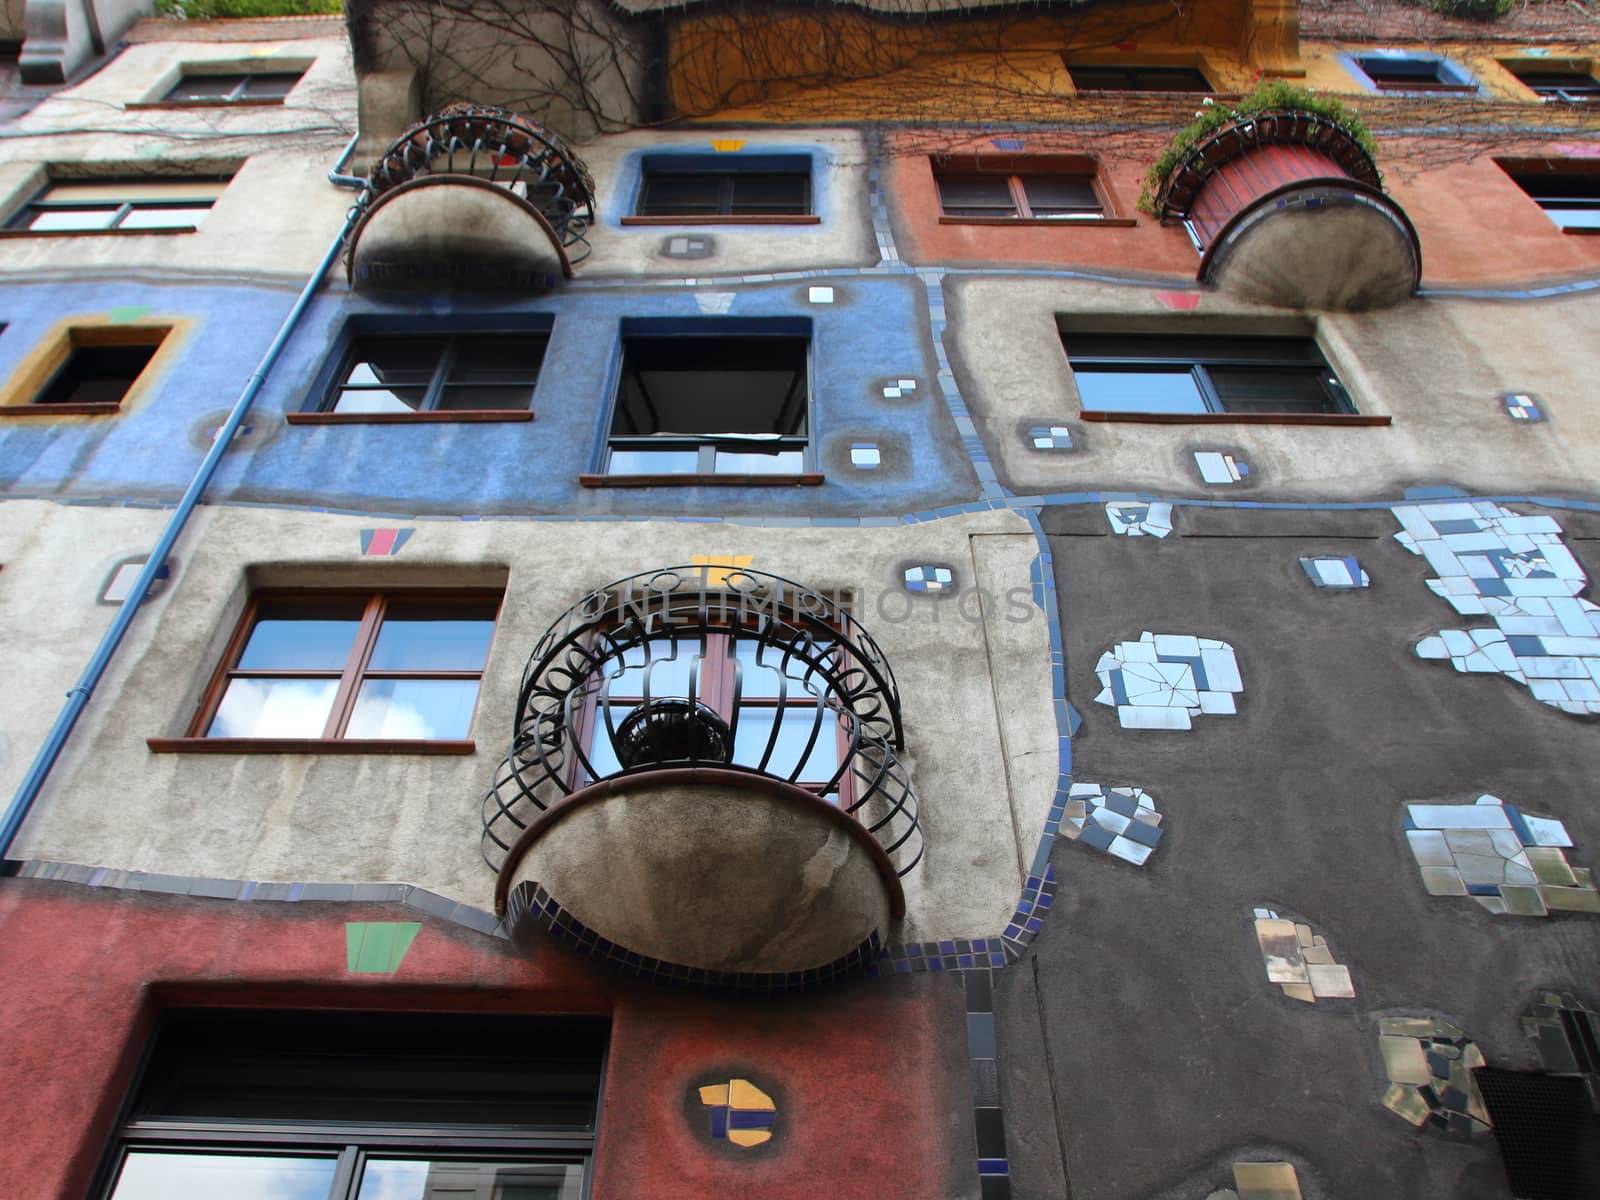 Balcony on Hundertwasser Colorful Decorated Building in Vienna Austria